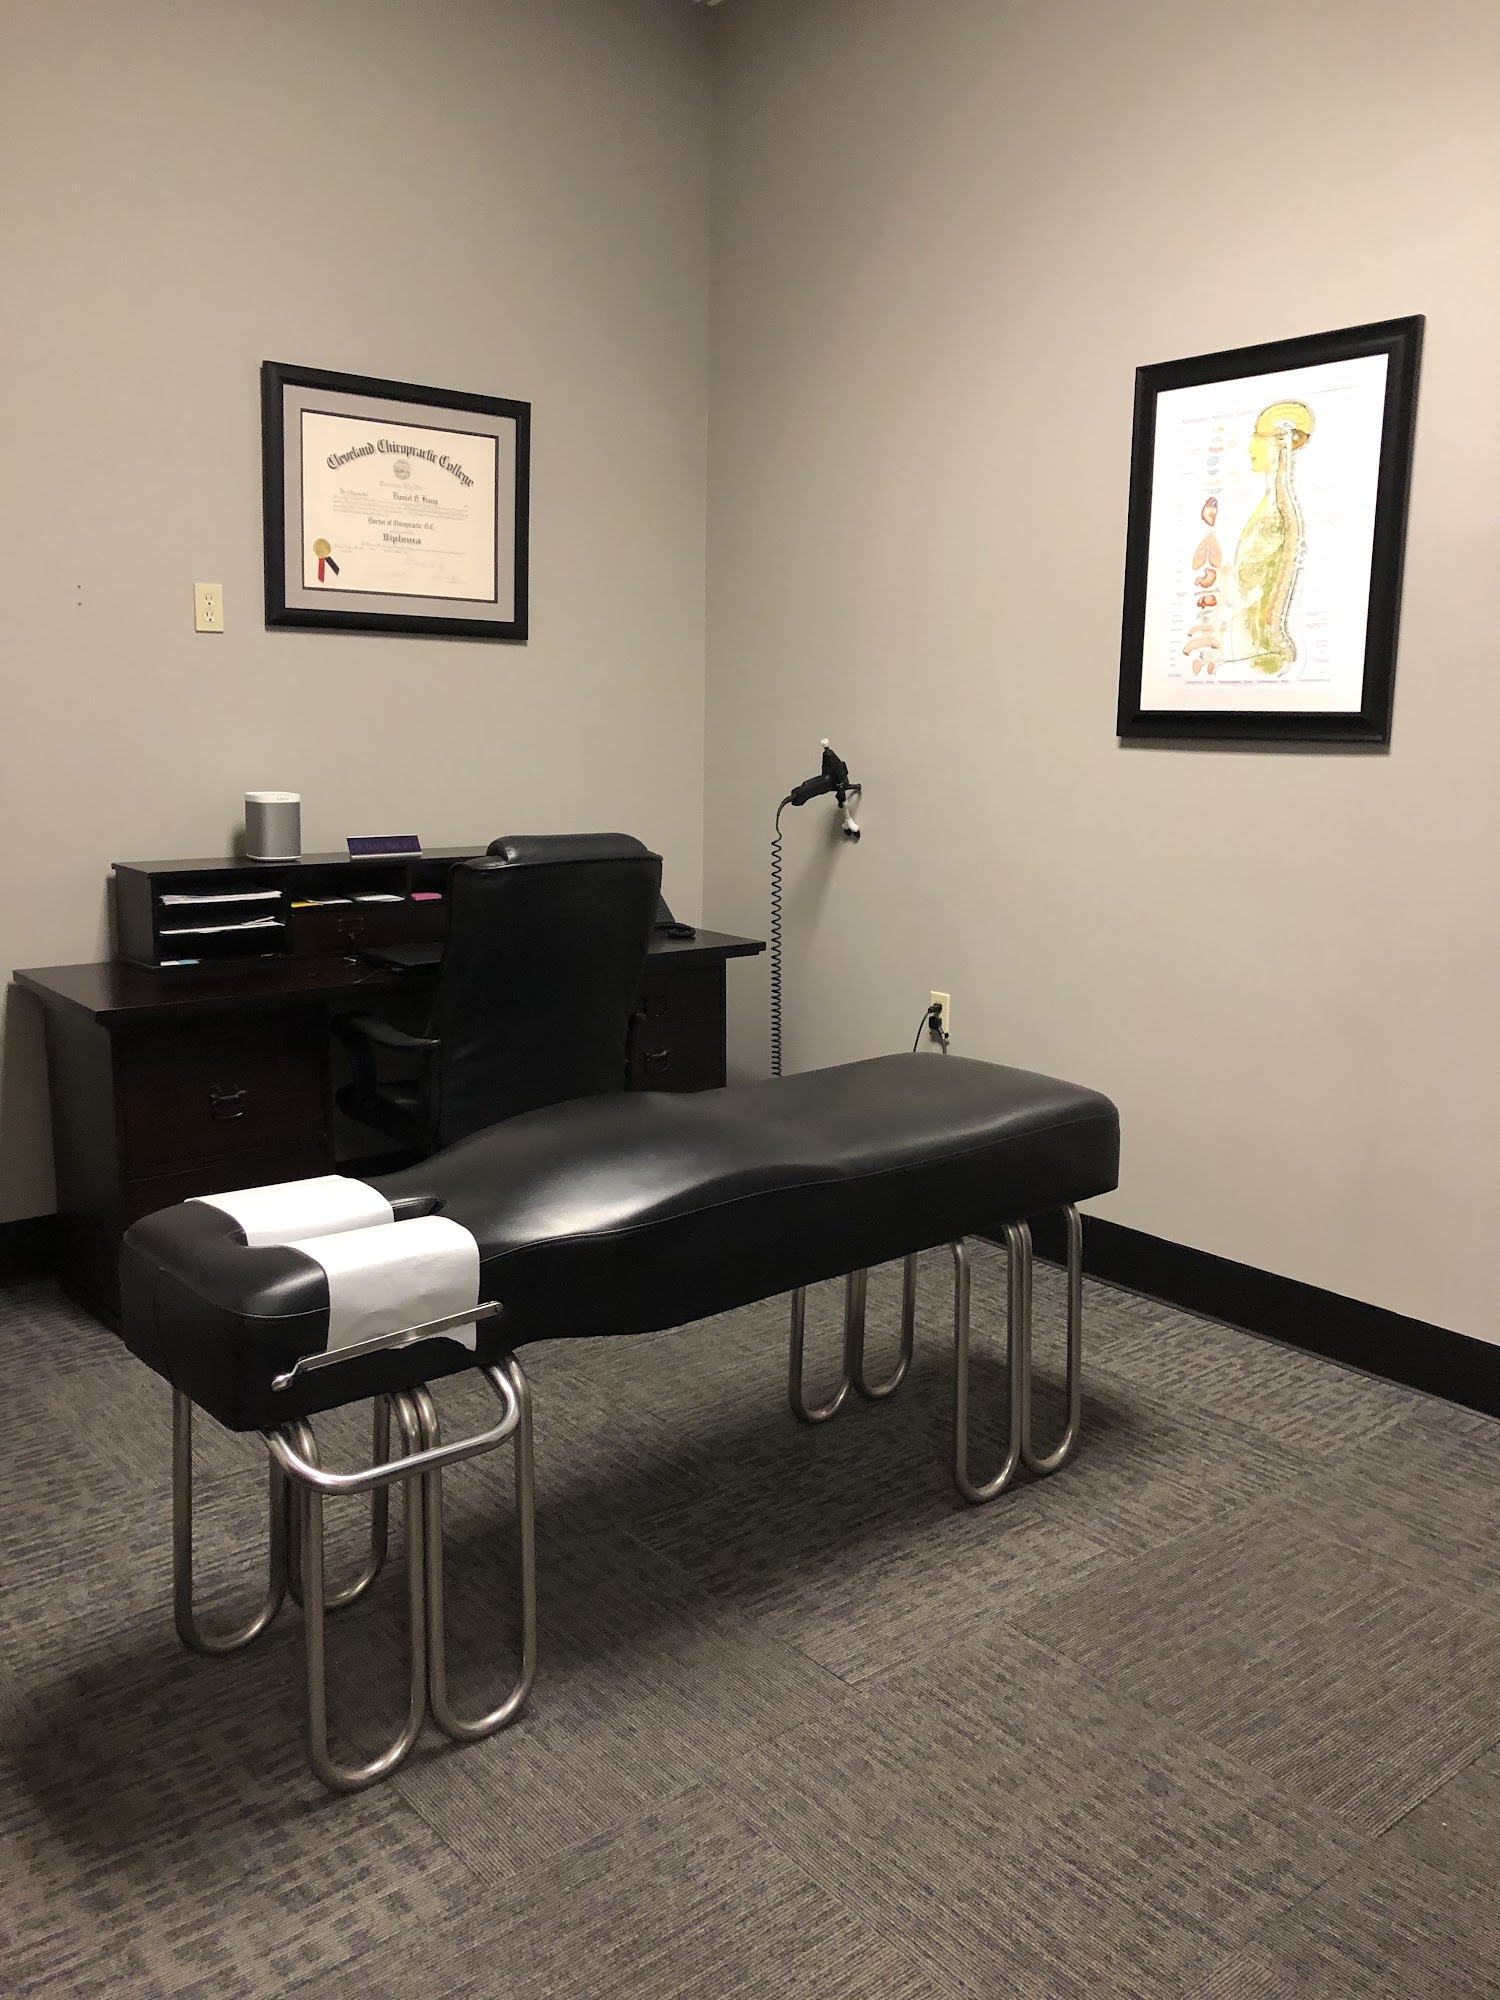 Midwest Chiropractic Center 1202 Front St, Tonganoxie Kansas 66086